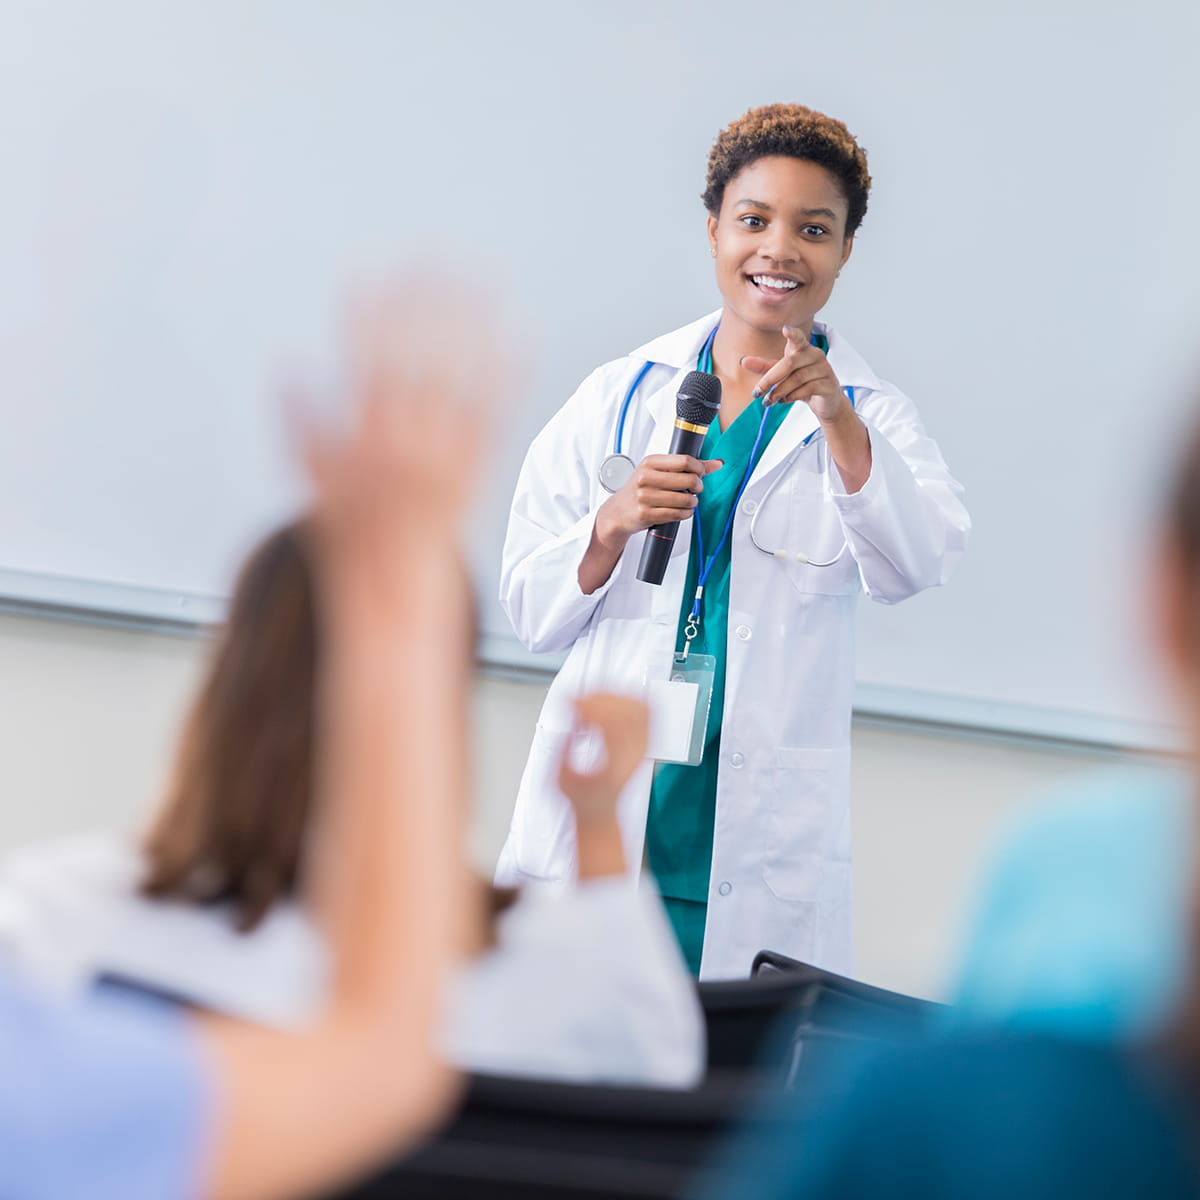 Women doctor teaching with a student raising her hand.